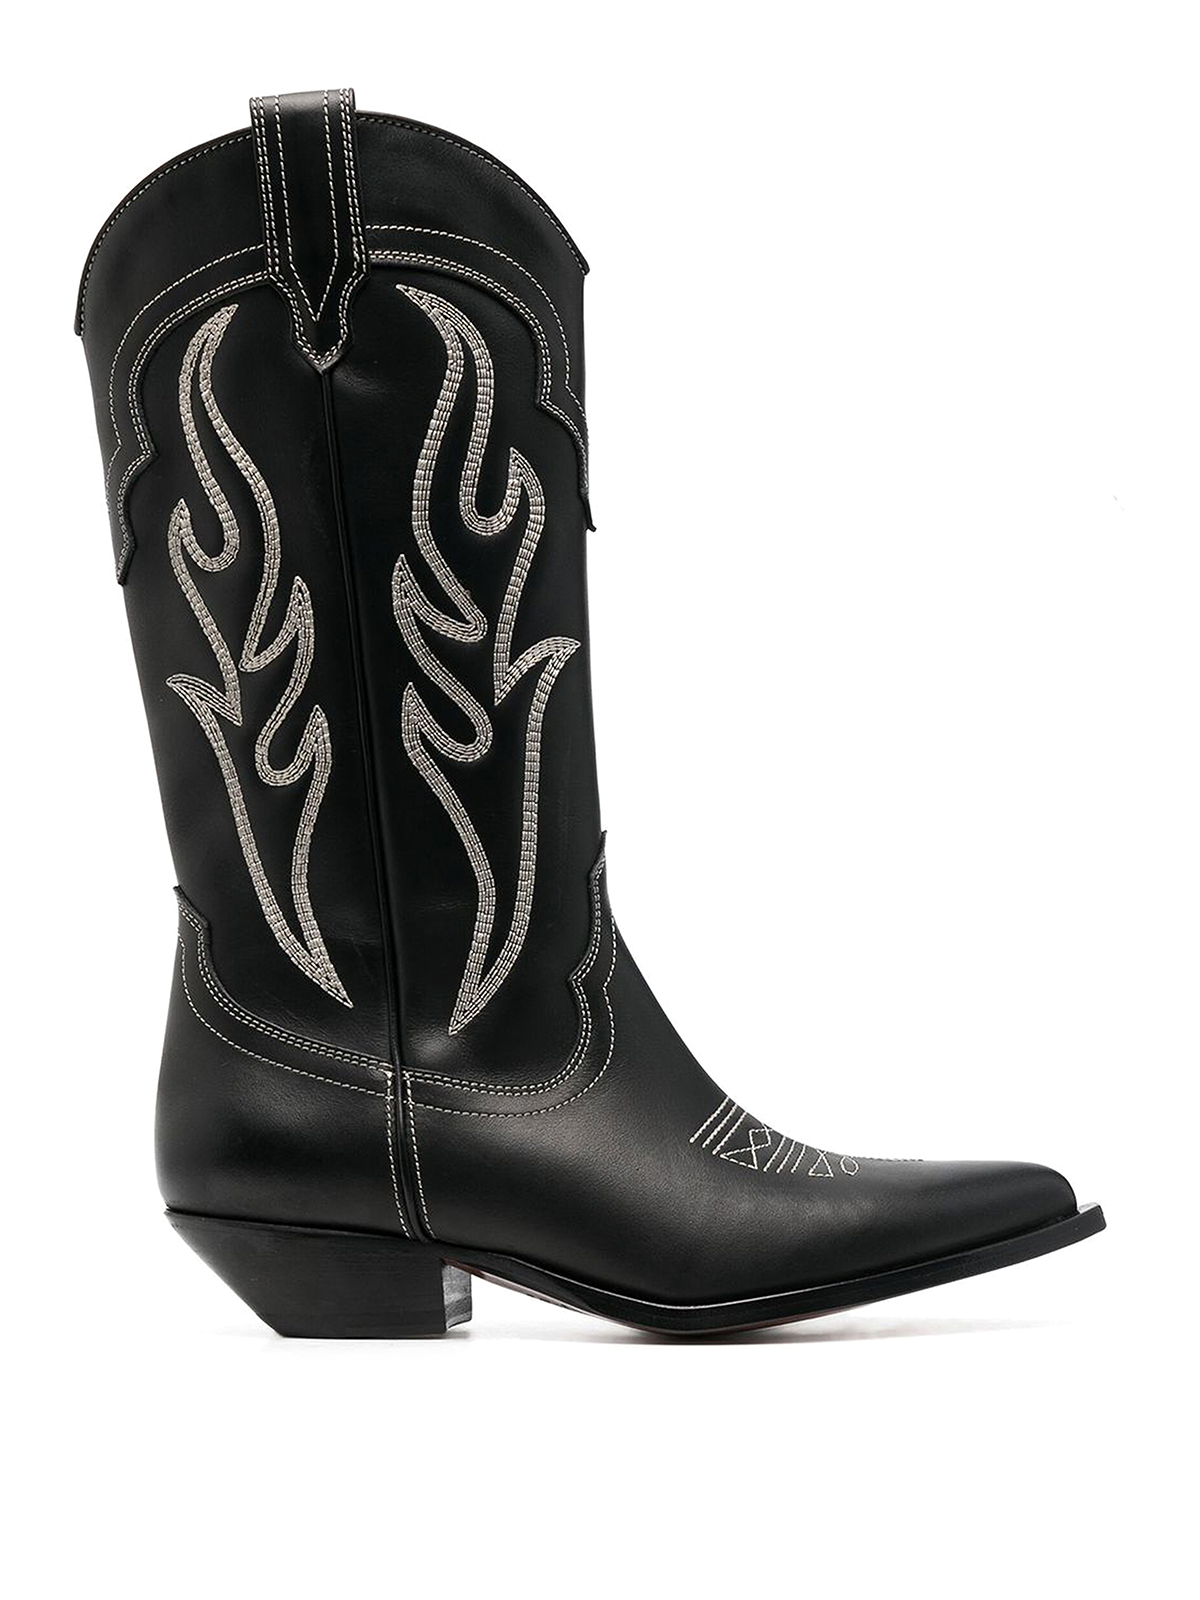 Sonora Santa Fe Boots, Ankle Boots Black